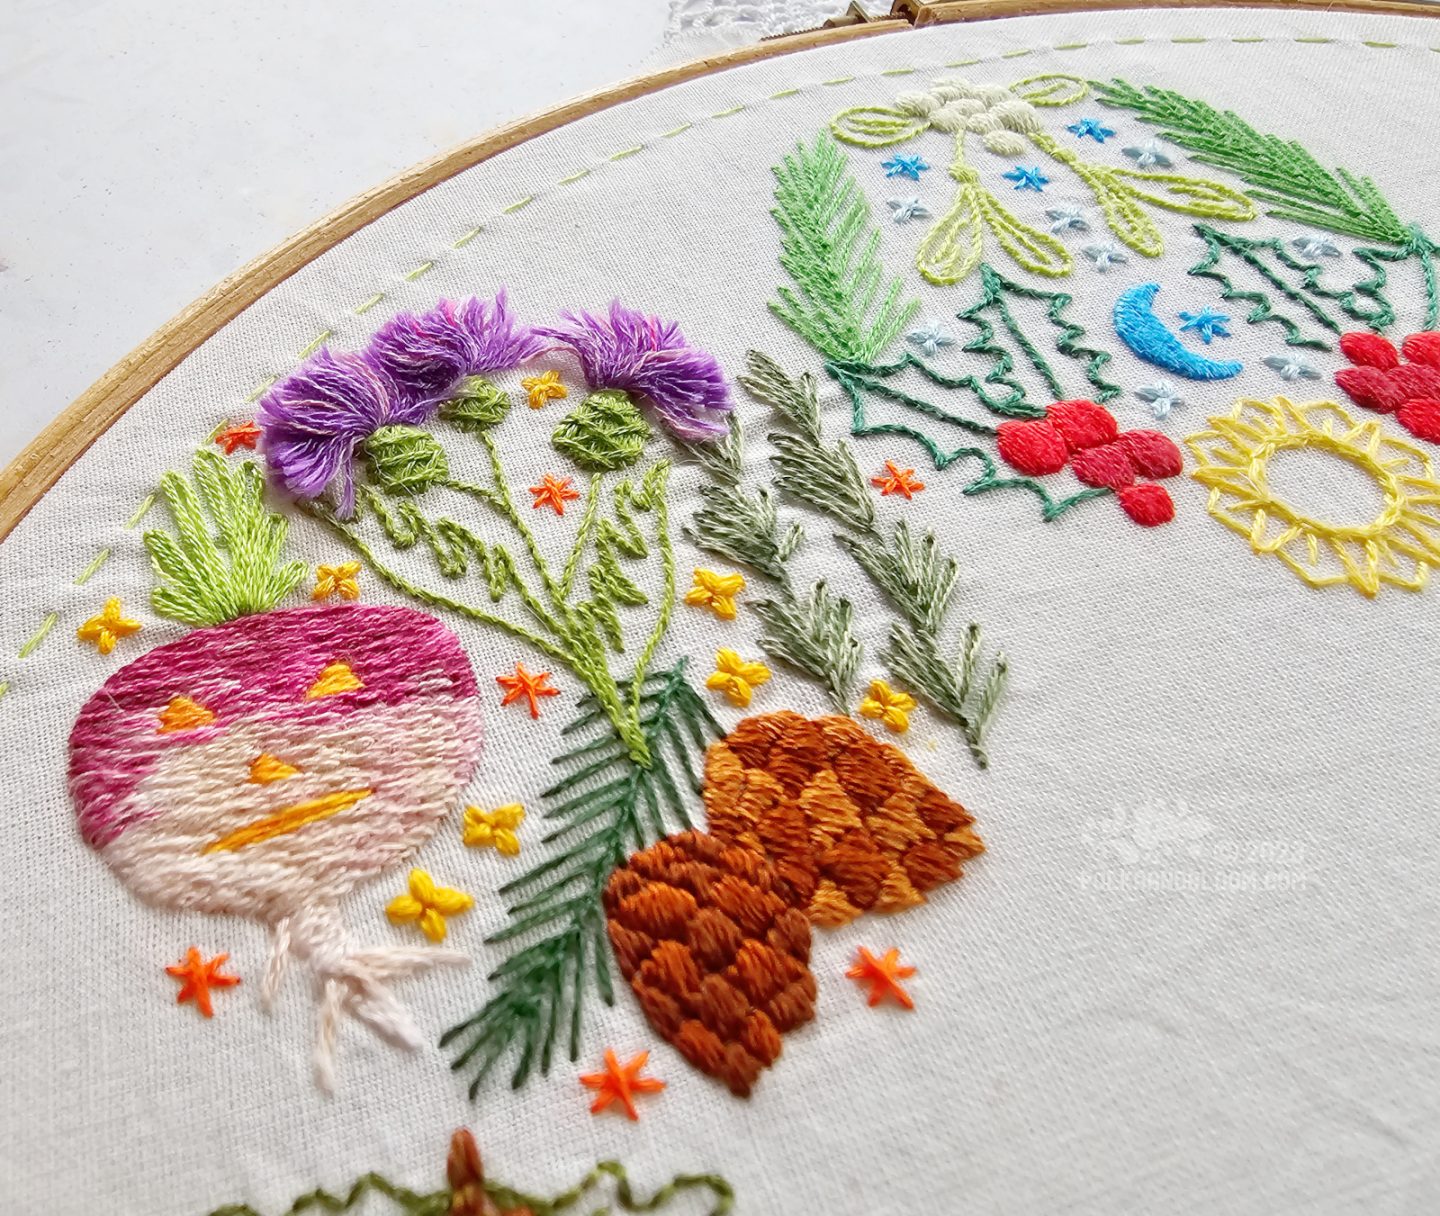 Closeup of a circular embroidery with pine cones, thistles and a carved turnip.